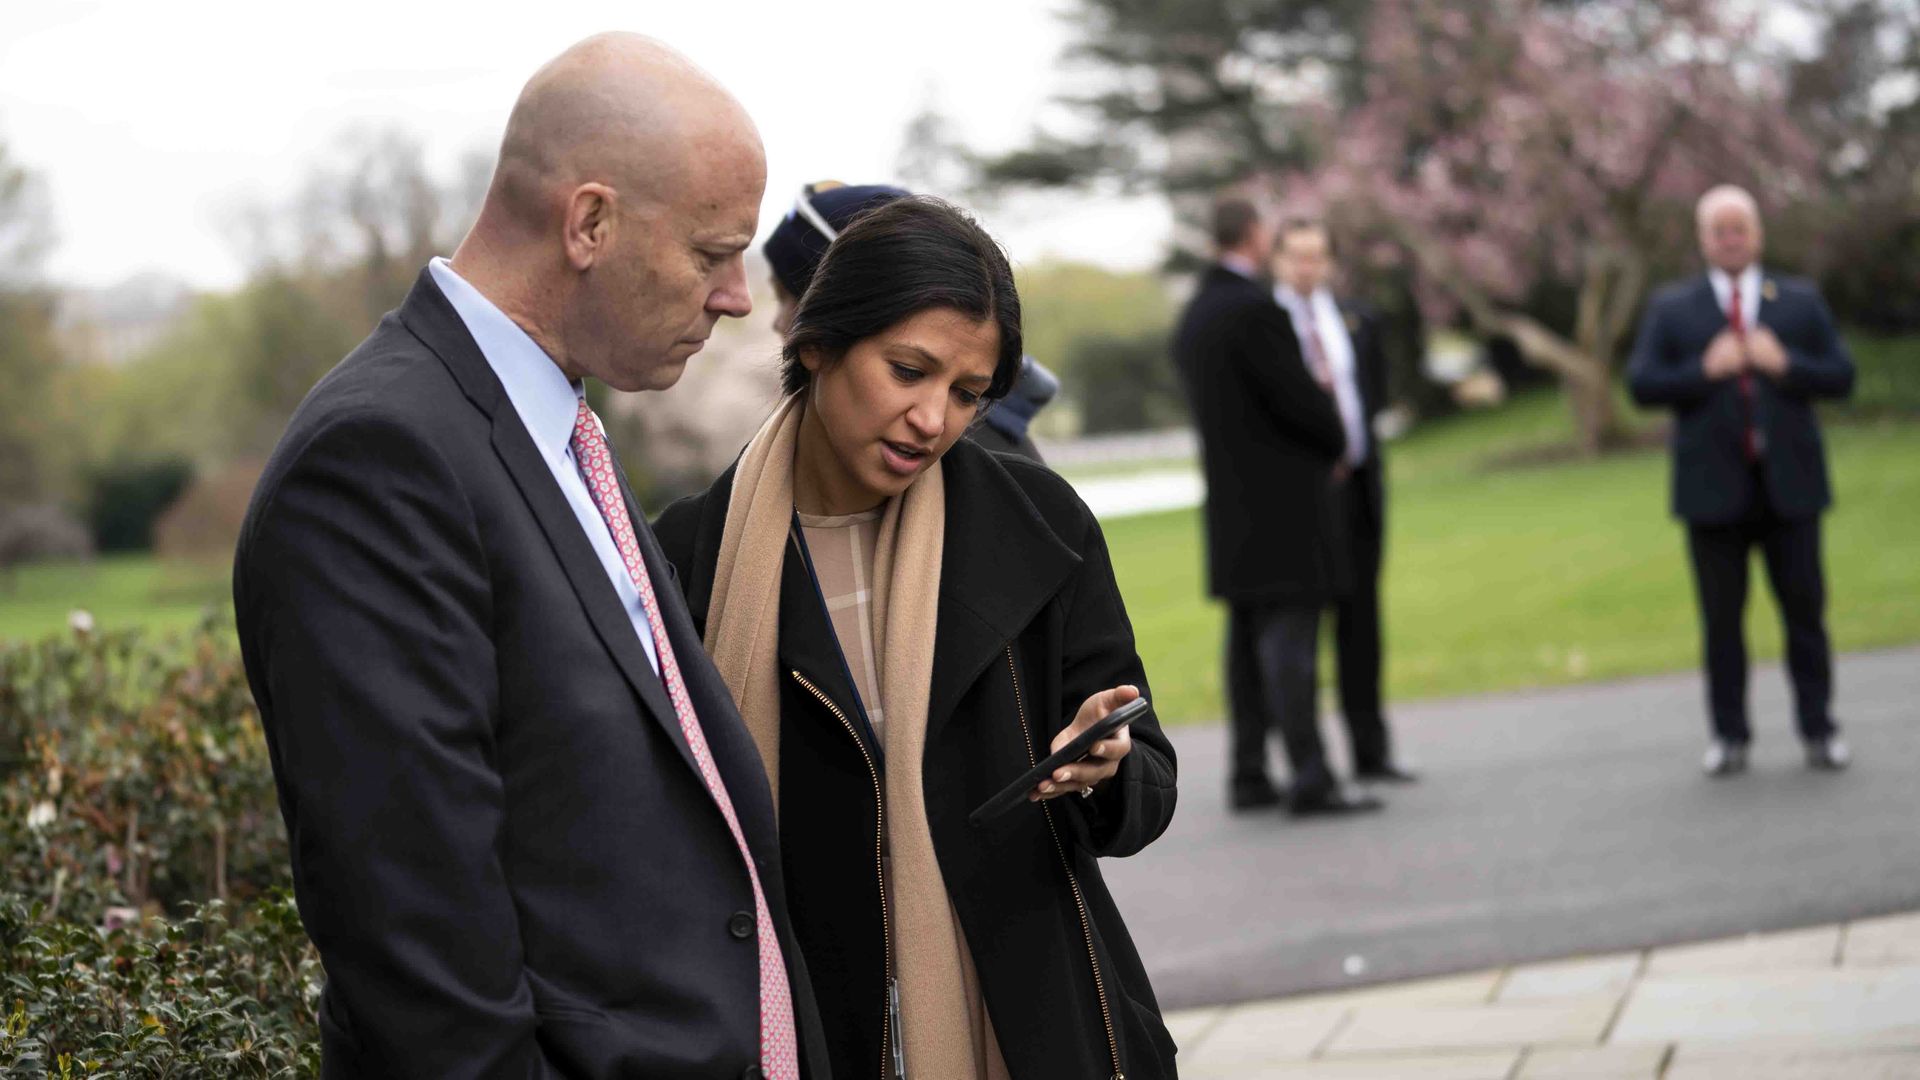  Marc Short, Chief of Staff for Vice President Mike Pence (L) talks with Katie Miller, Vice President Mike Pence's press secretary)